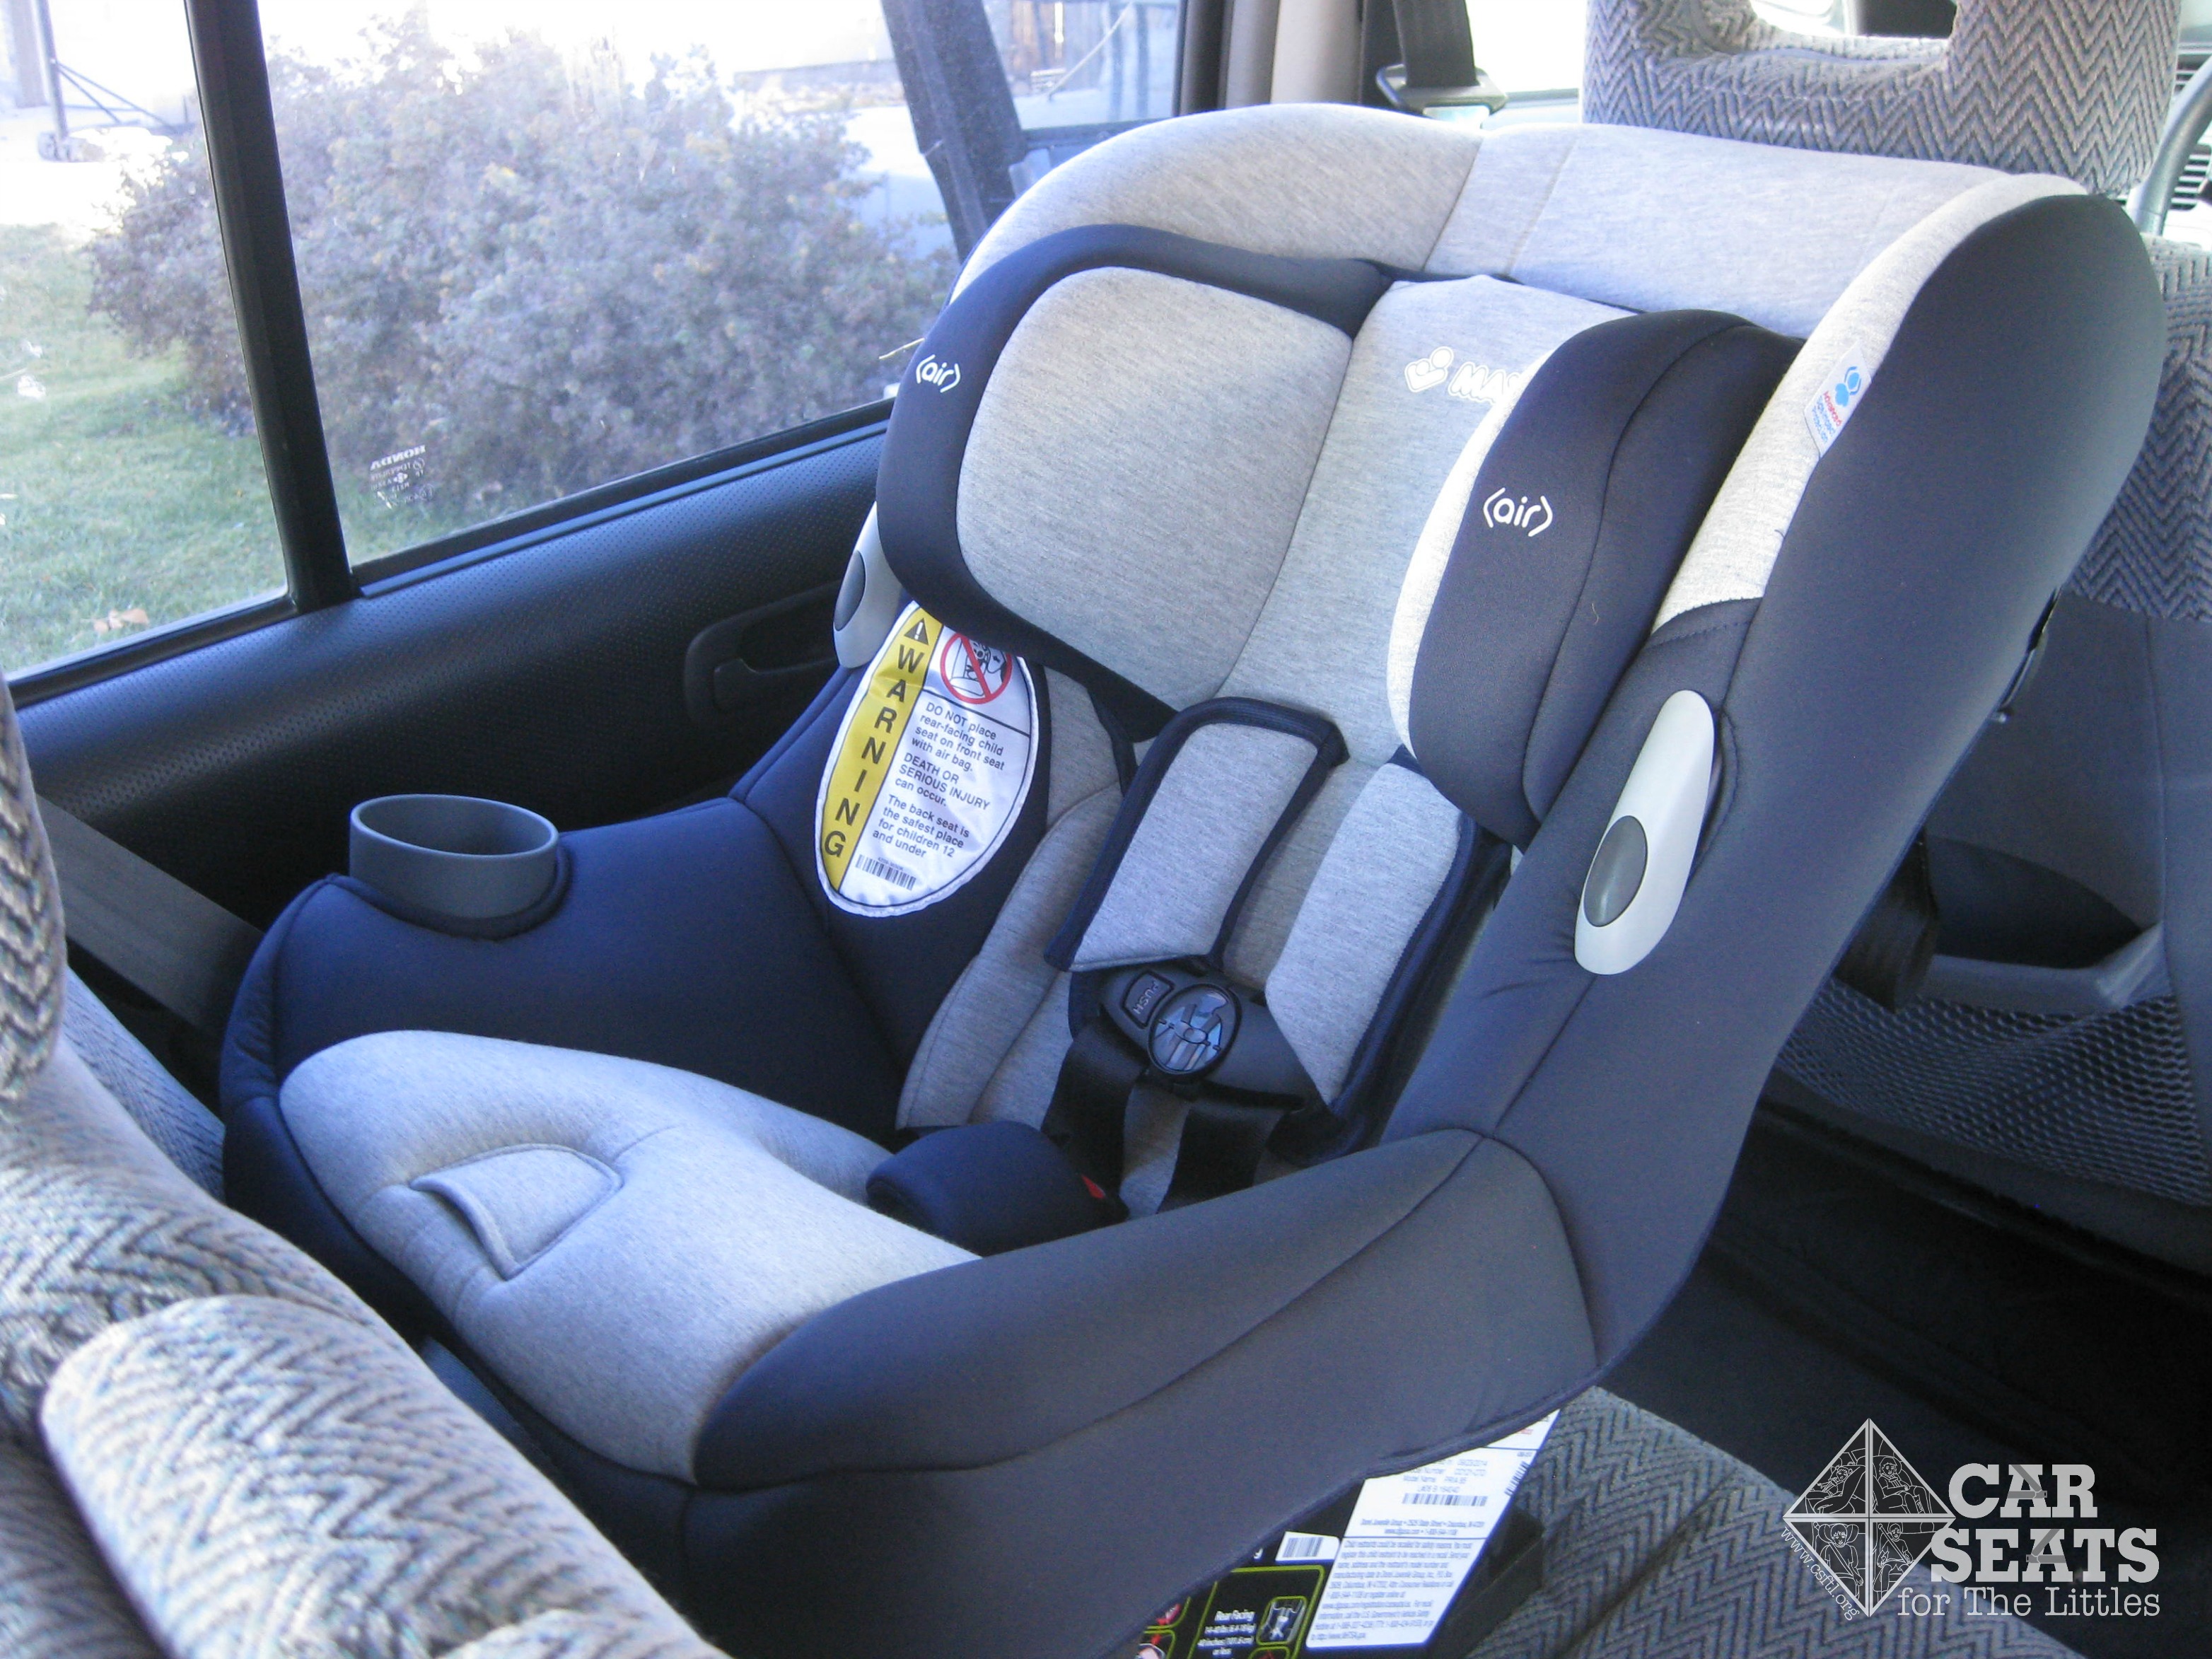 Maxi Cosi Pria 85 Review Car Seats For The Littles - Maxi Cosi Car Seat Instructions With Base